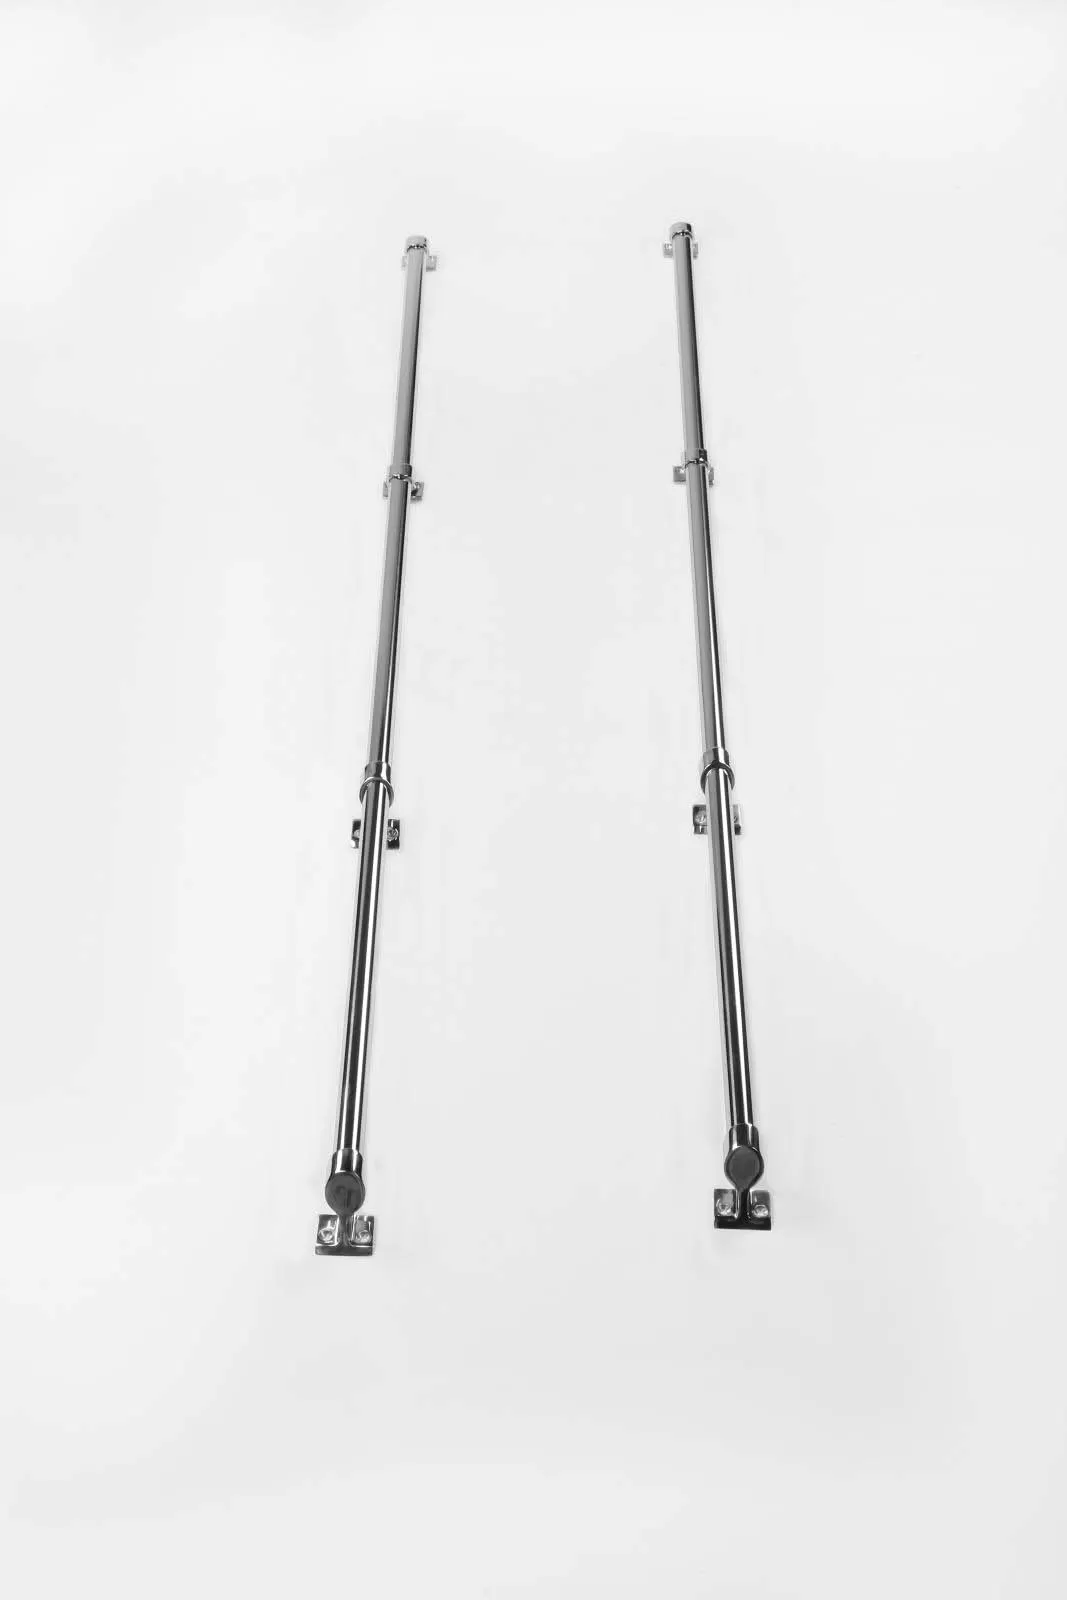 Perrycraft Mini Tube Truck Bed Rail Set 68 Inch Impact Stainless Steel MTR - MR-I68-S